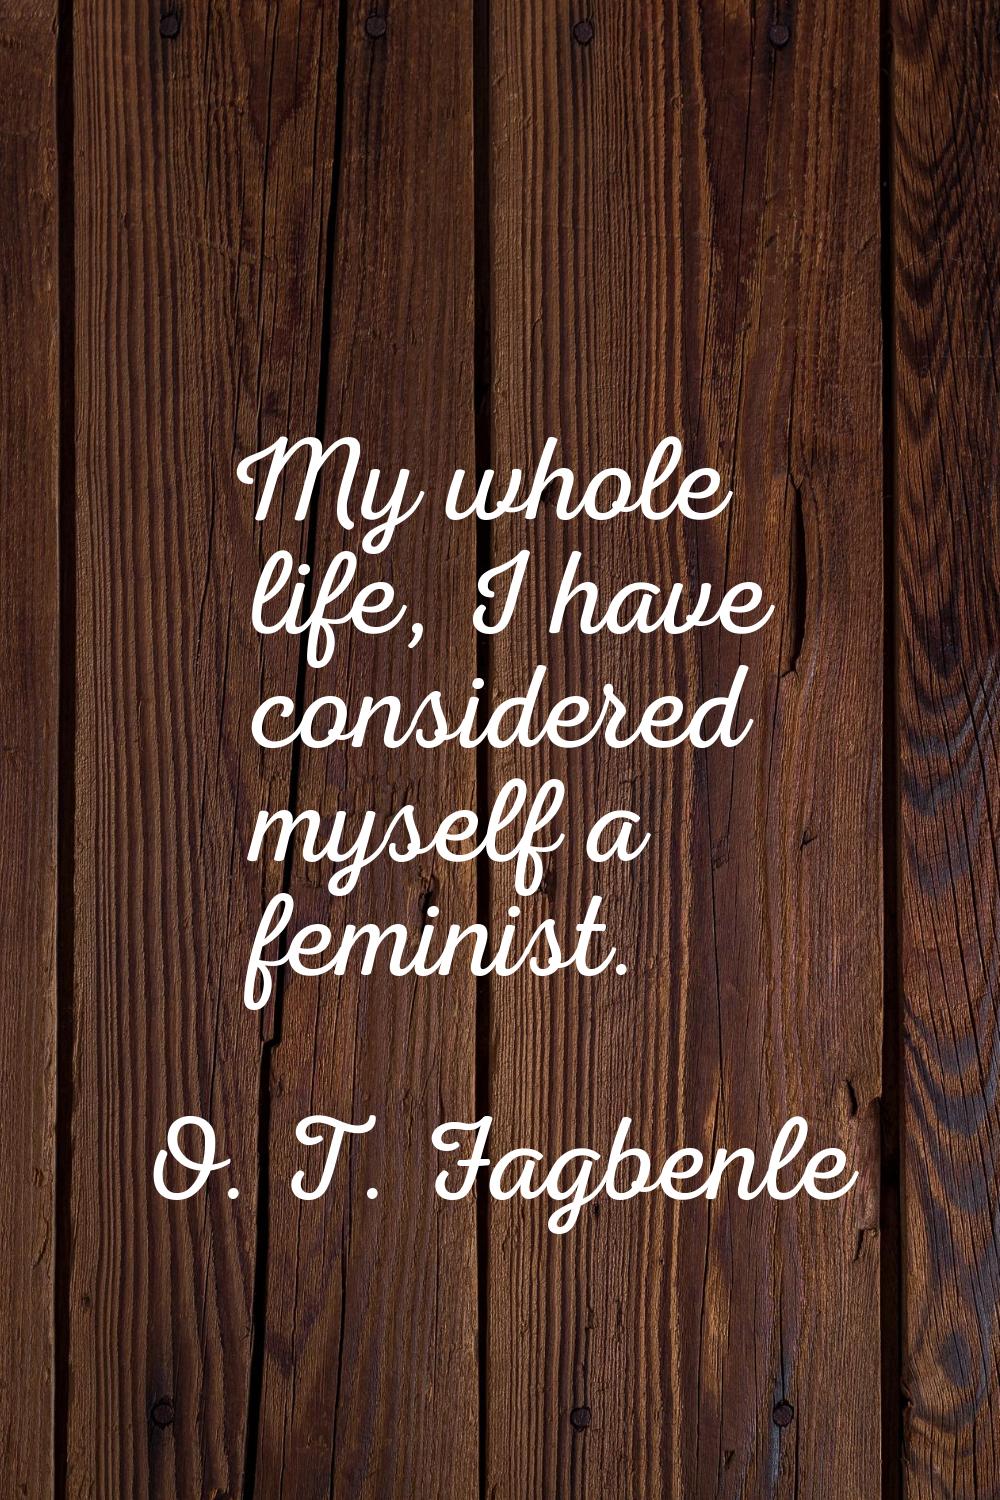 My whole life, I have considered myself a feminist.